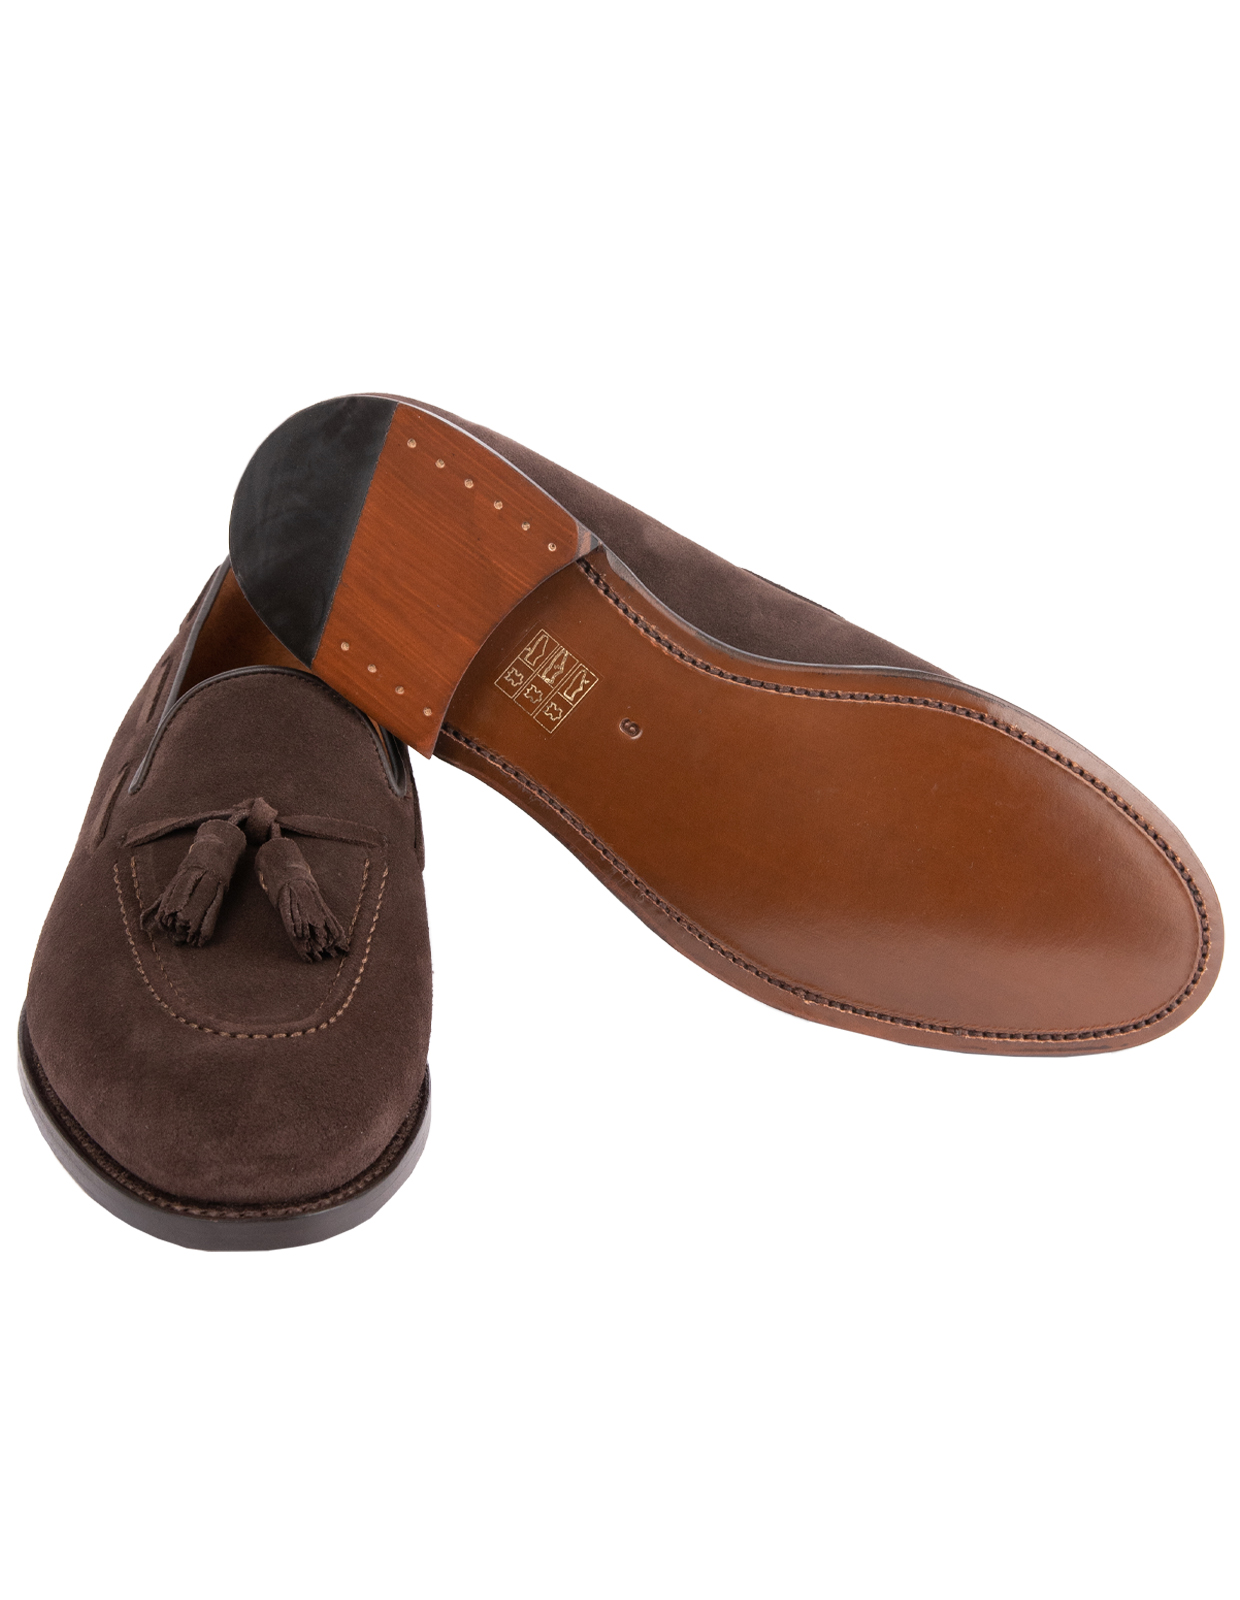 Tassel Loafers Suede Bitter Chocolate Stl 7.5